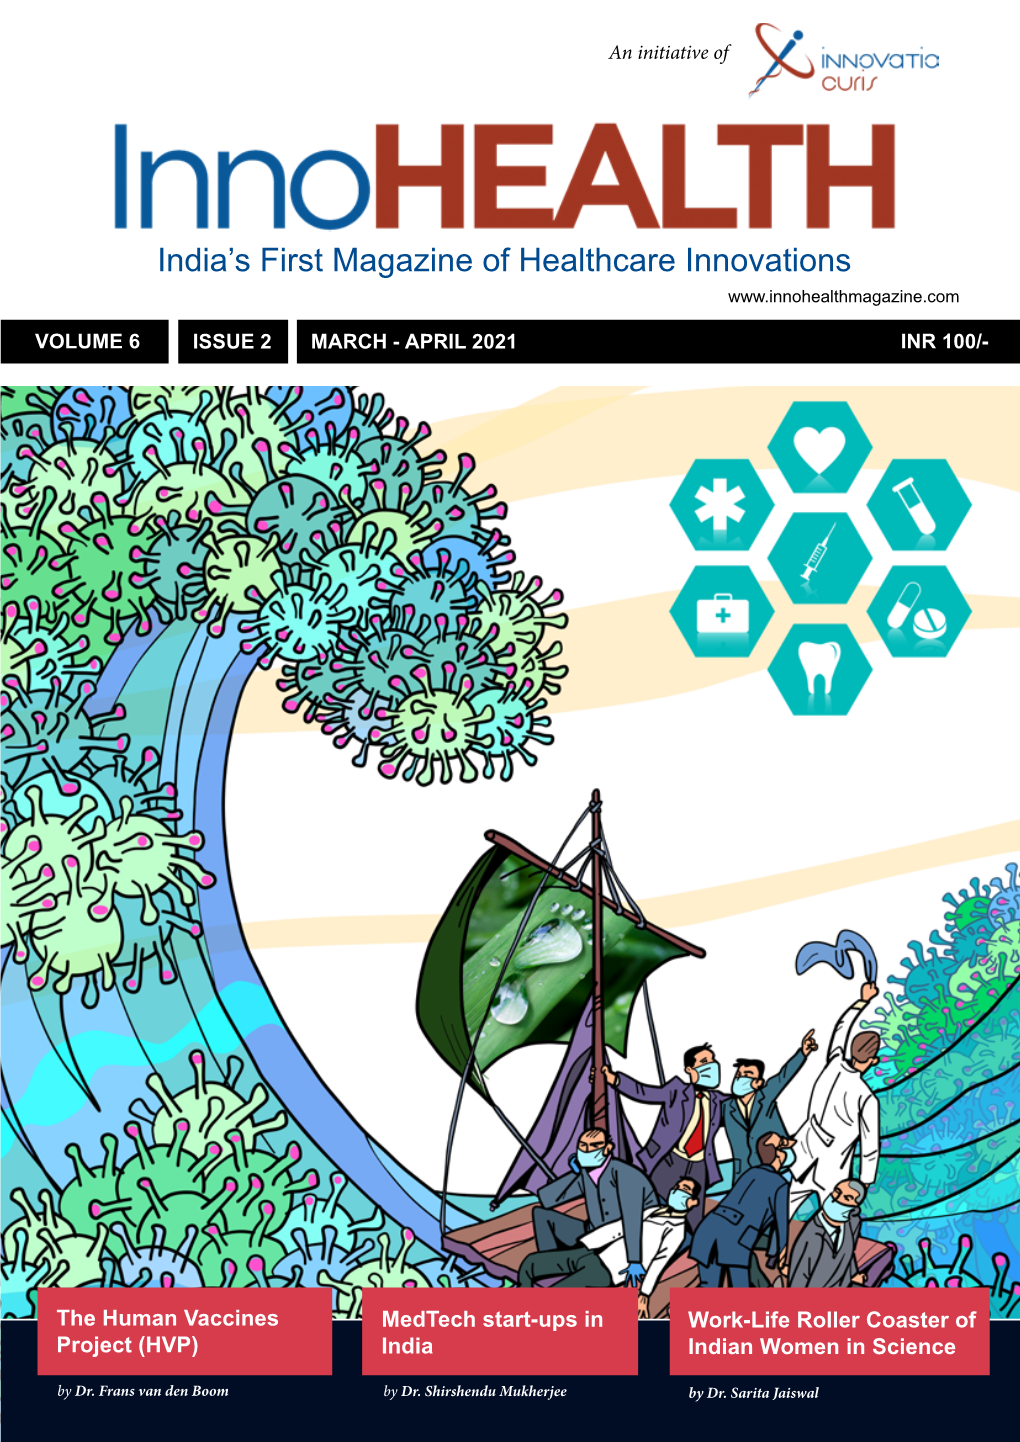 India's First Magazine of Healthcare Innovations